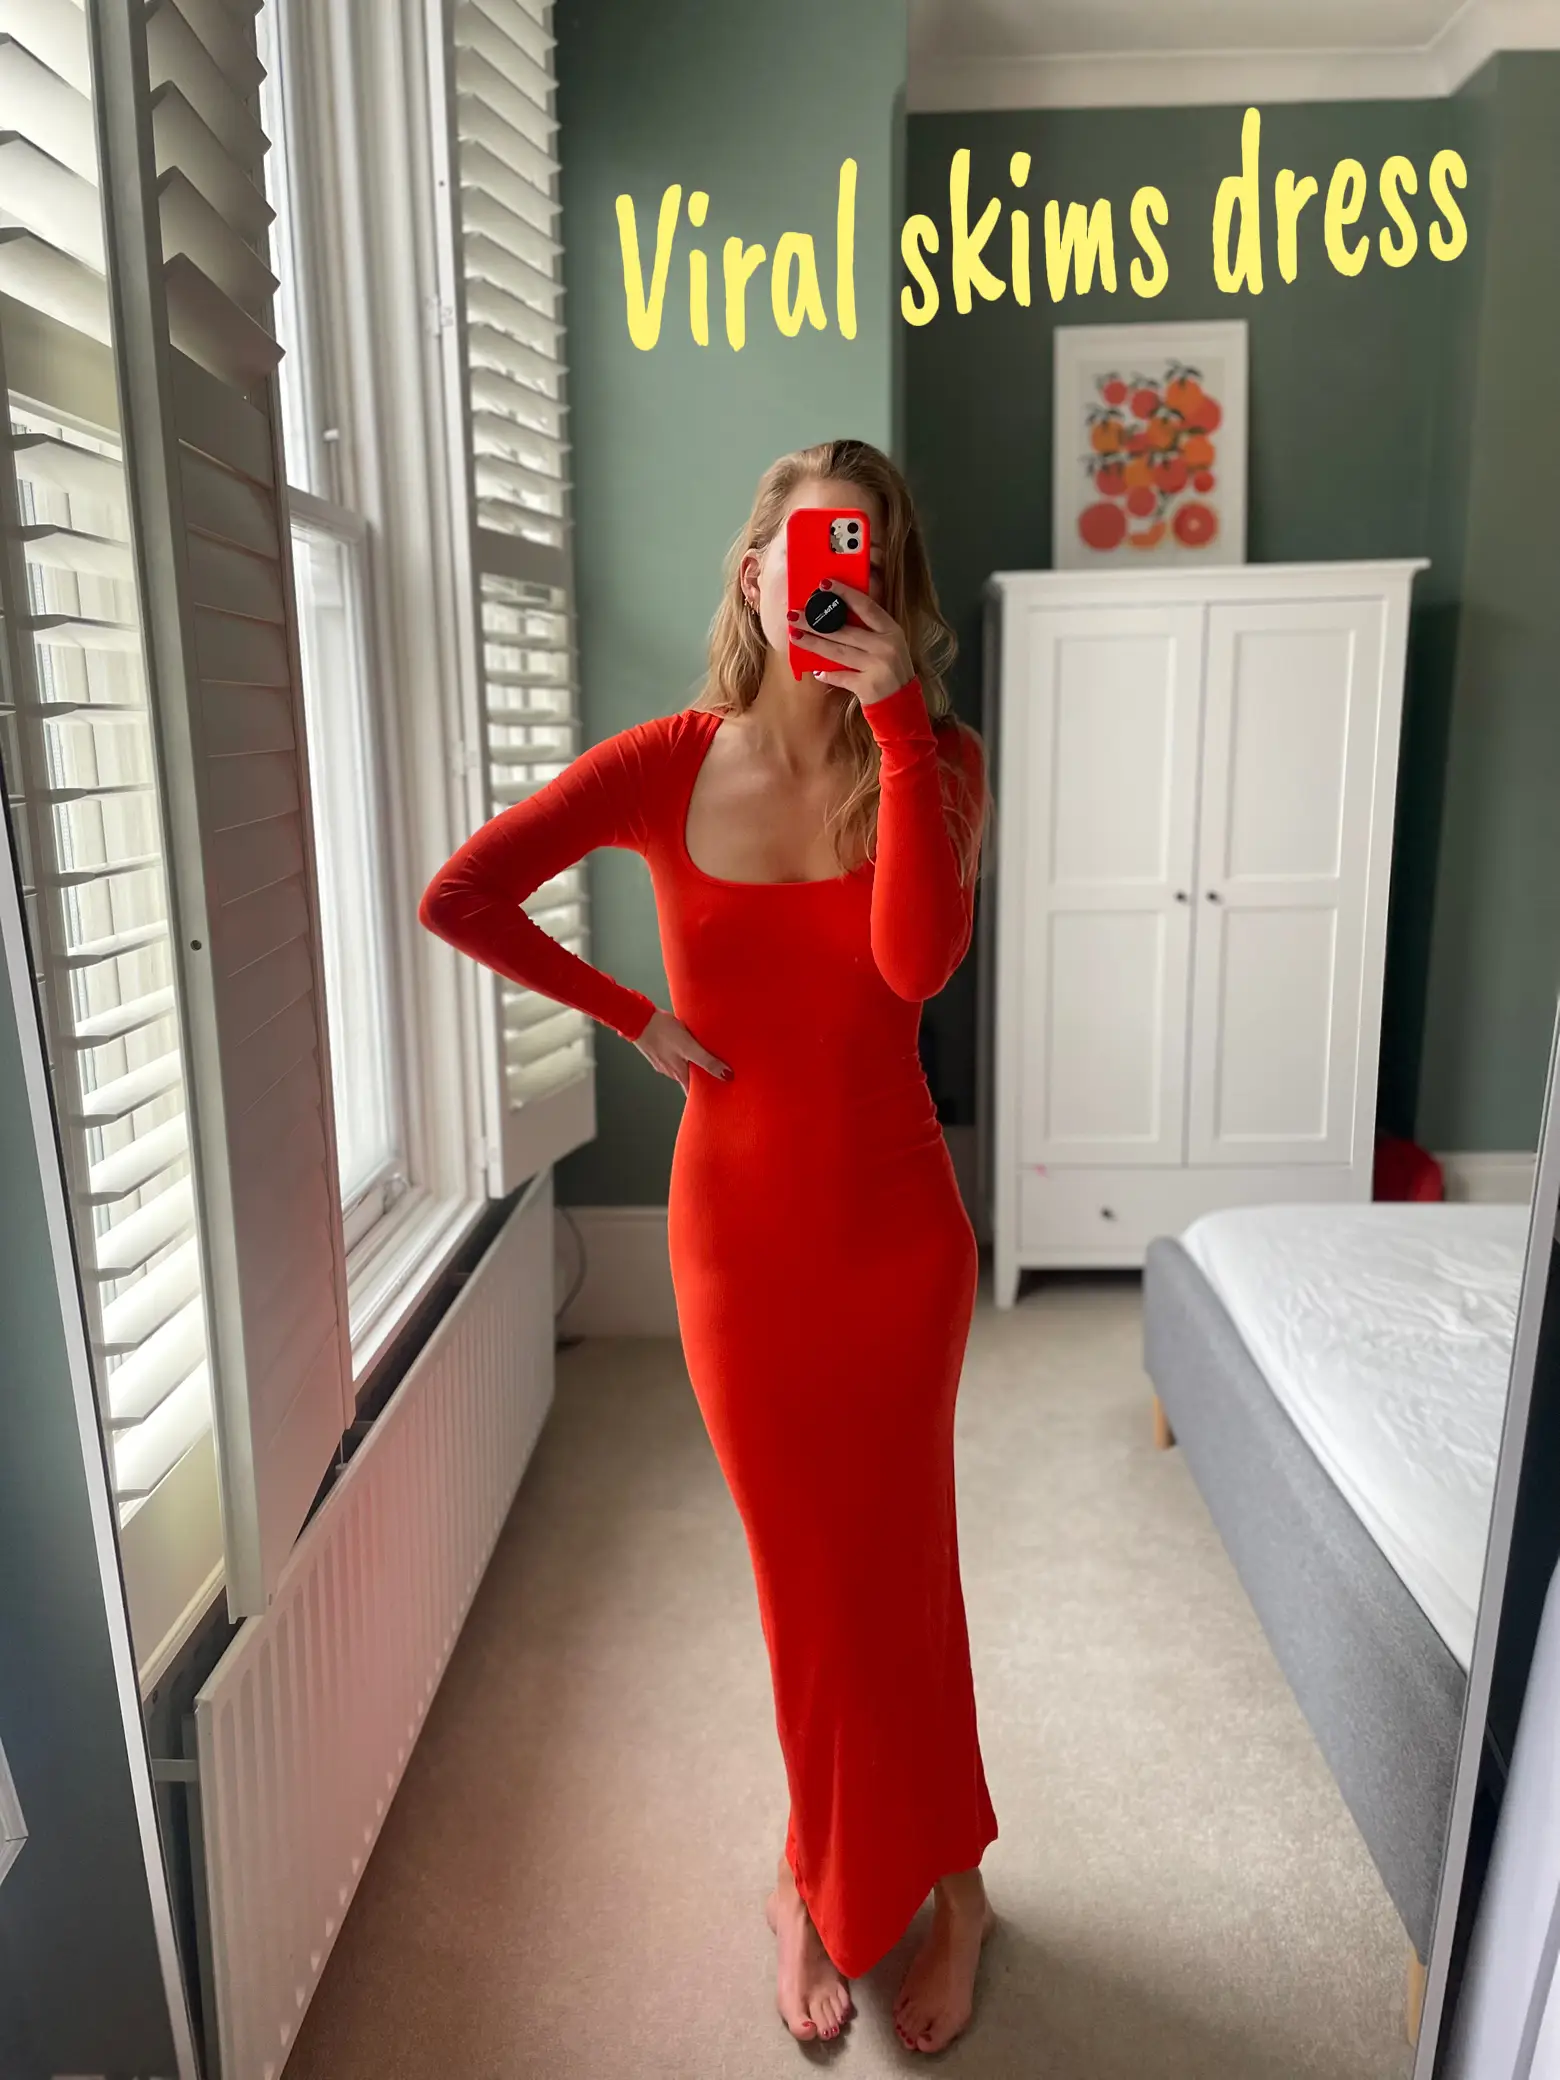 I bought the viral Skims dress in white - I felt 'hot and sexy